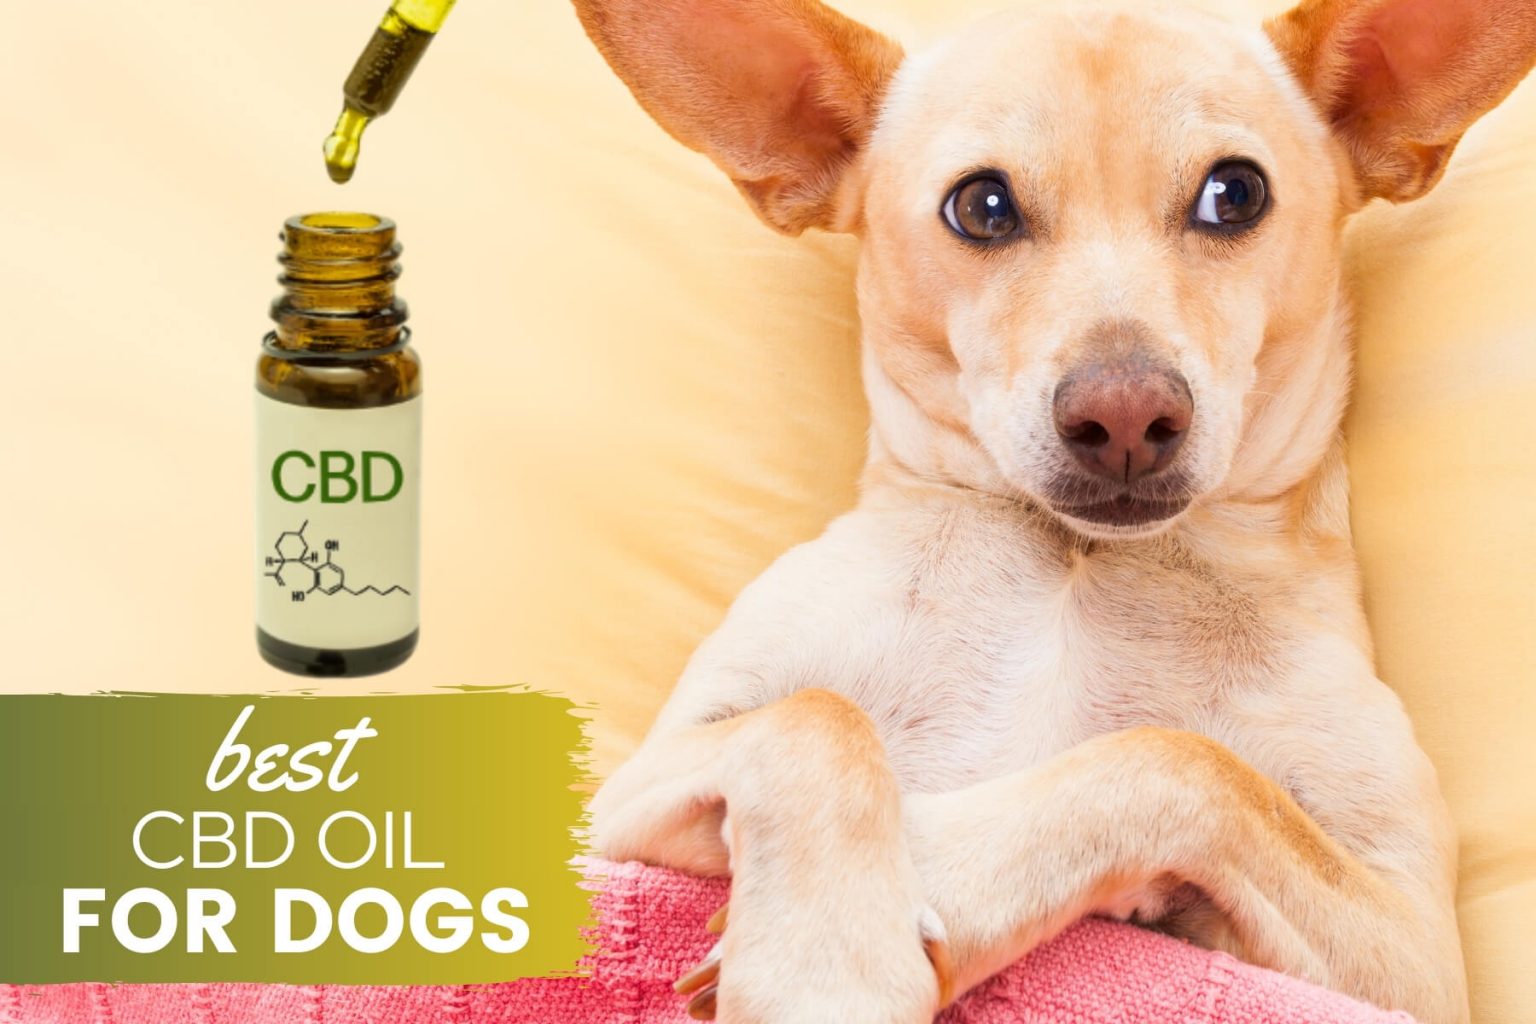 Best CBD Oil For Dogs A Cure For Arthritis, Anxiety, Pain